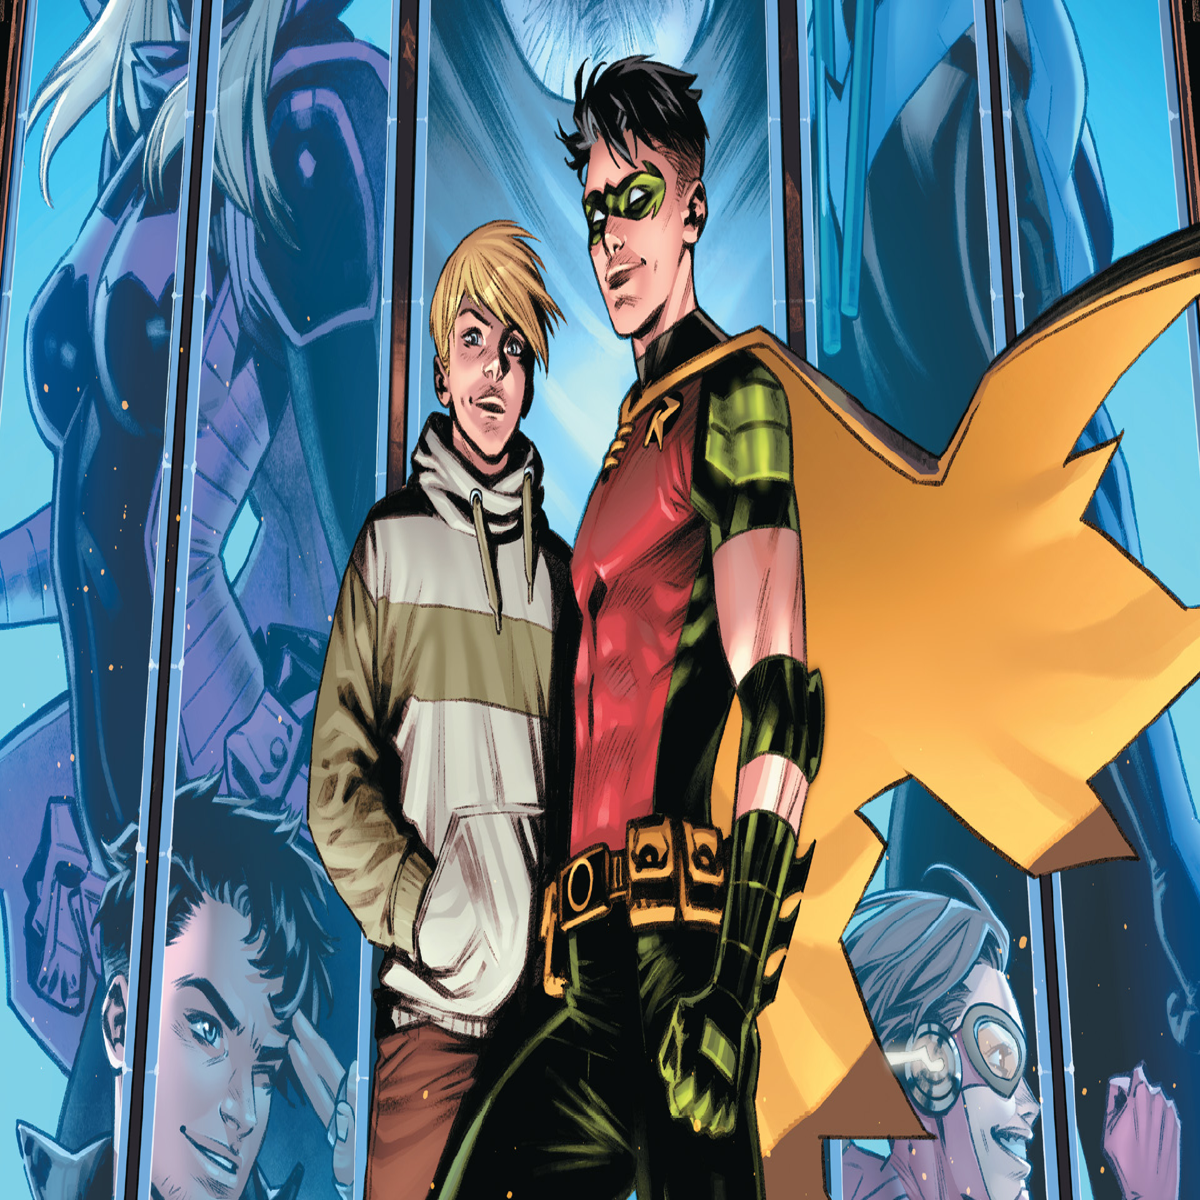 Robin explores his bisexuality in new Batman comic